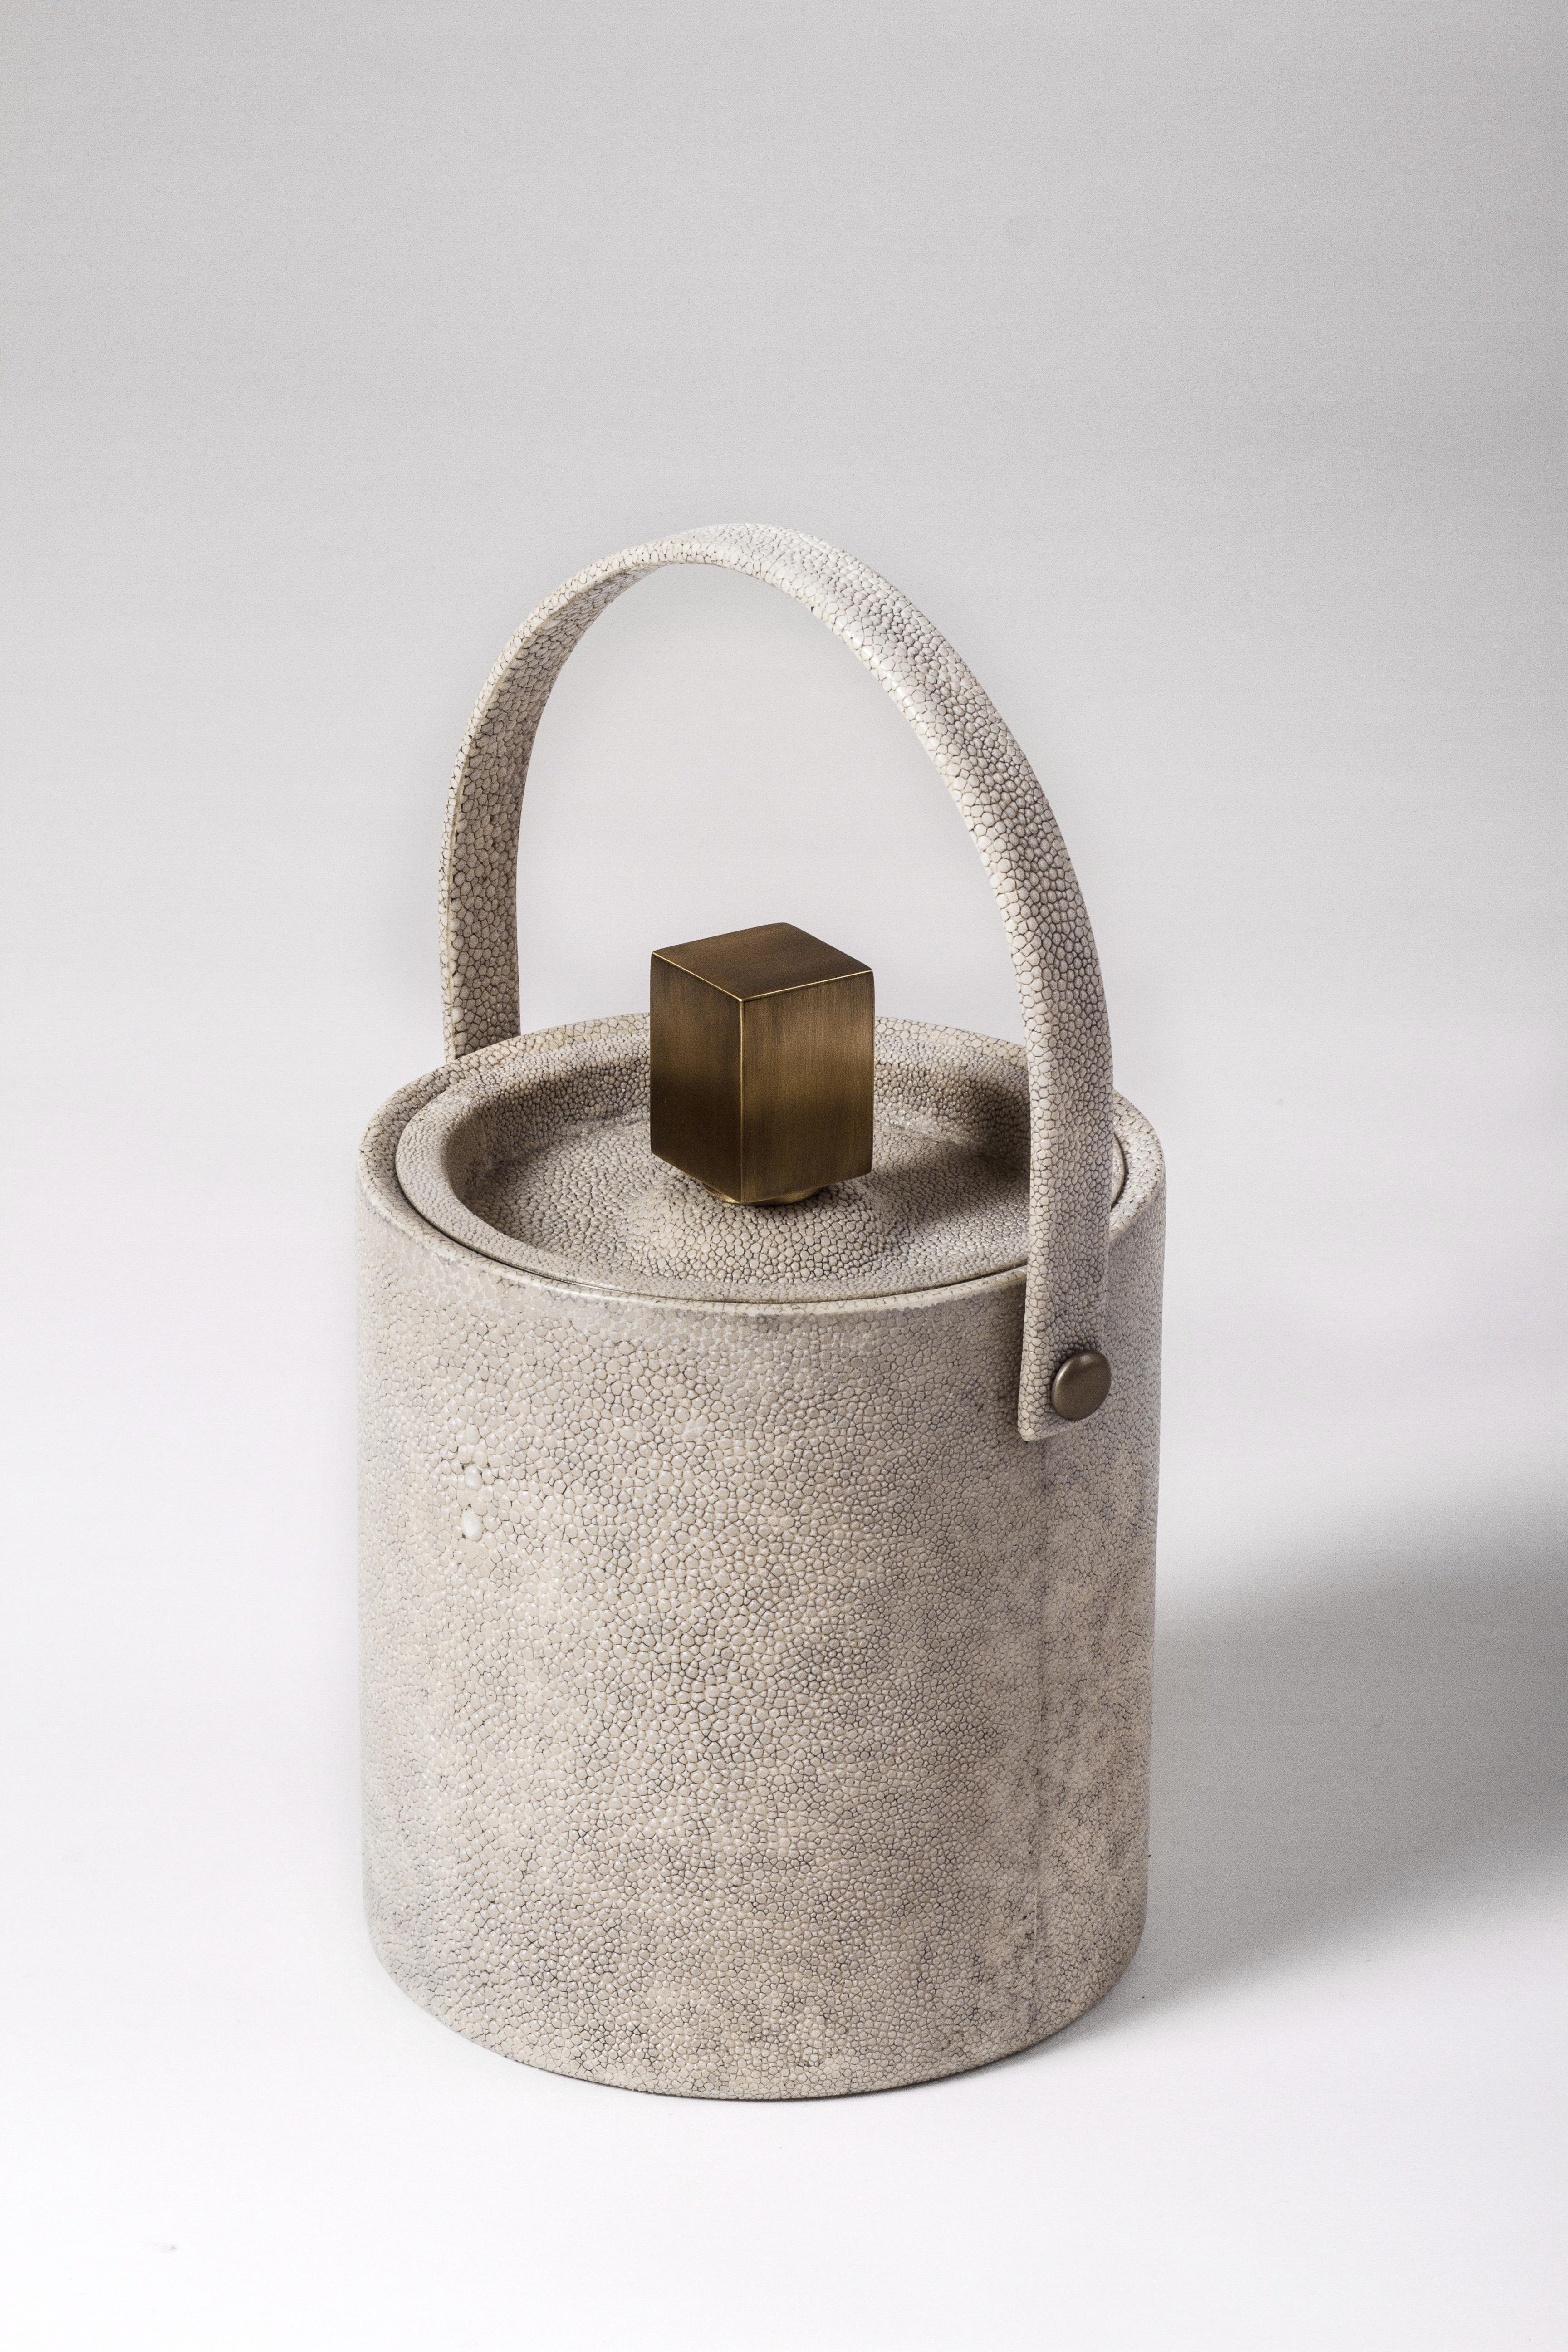 French Ice Bucket in Shagreen, Shell and Bronze Patina Brass by Kifu Paris For Sale